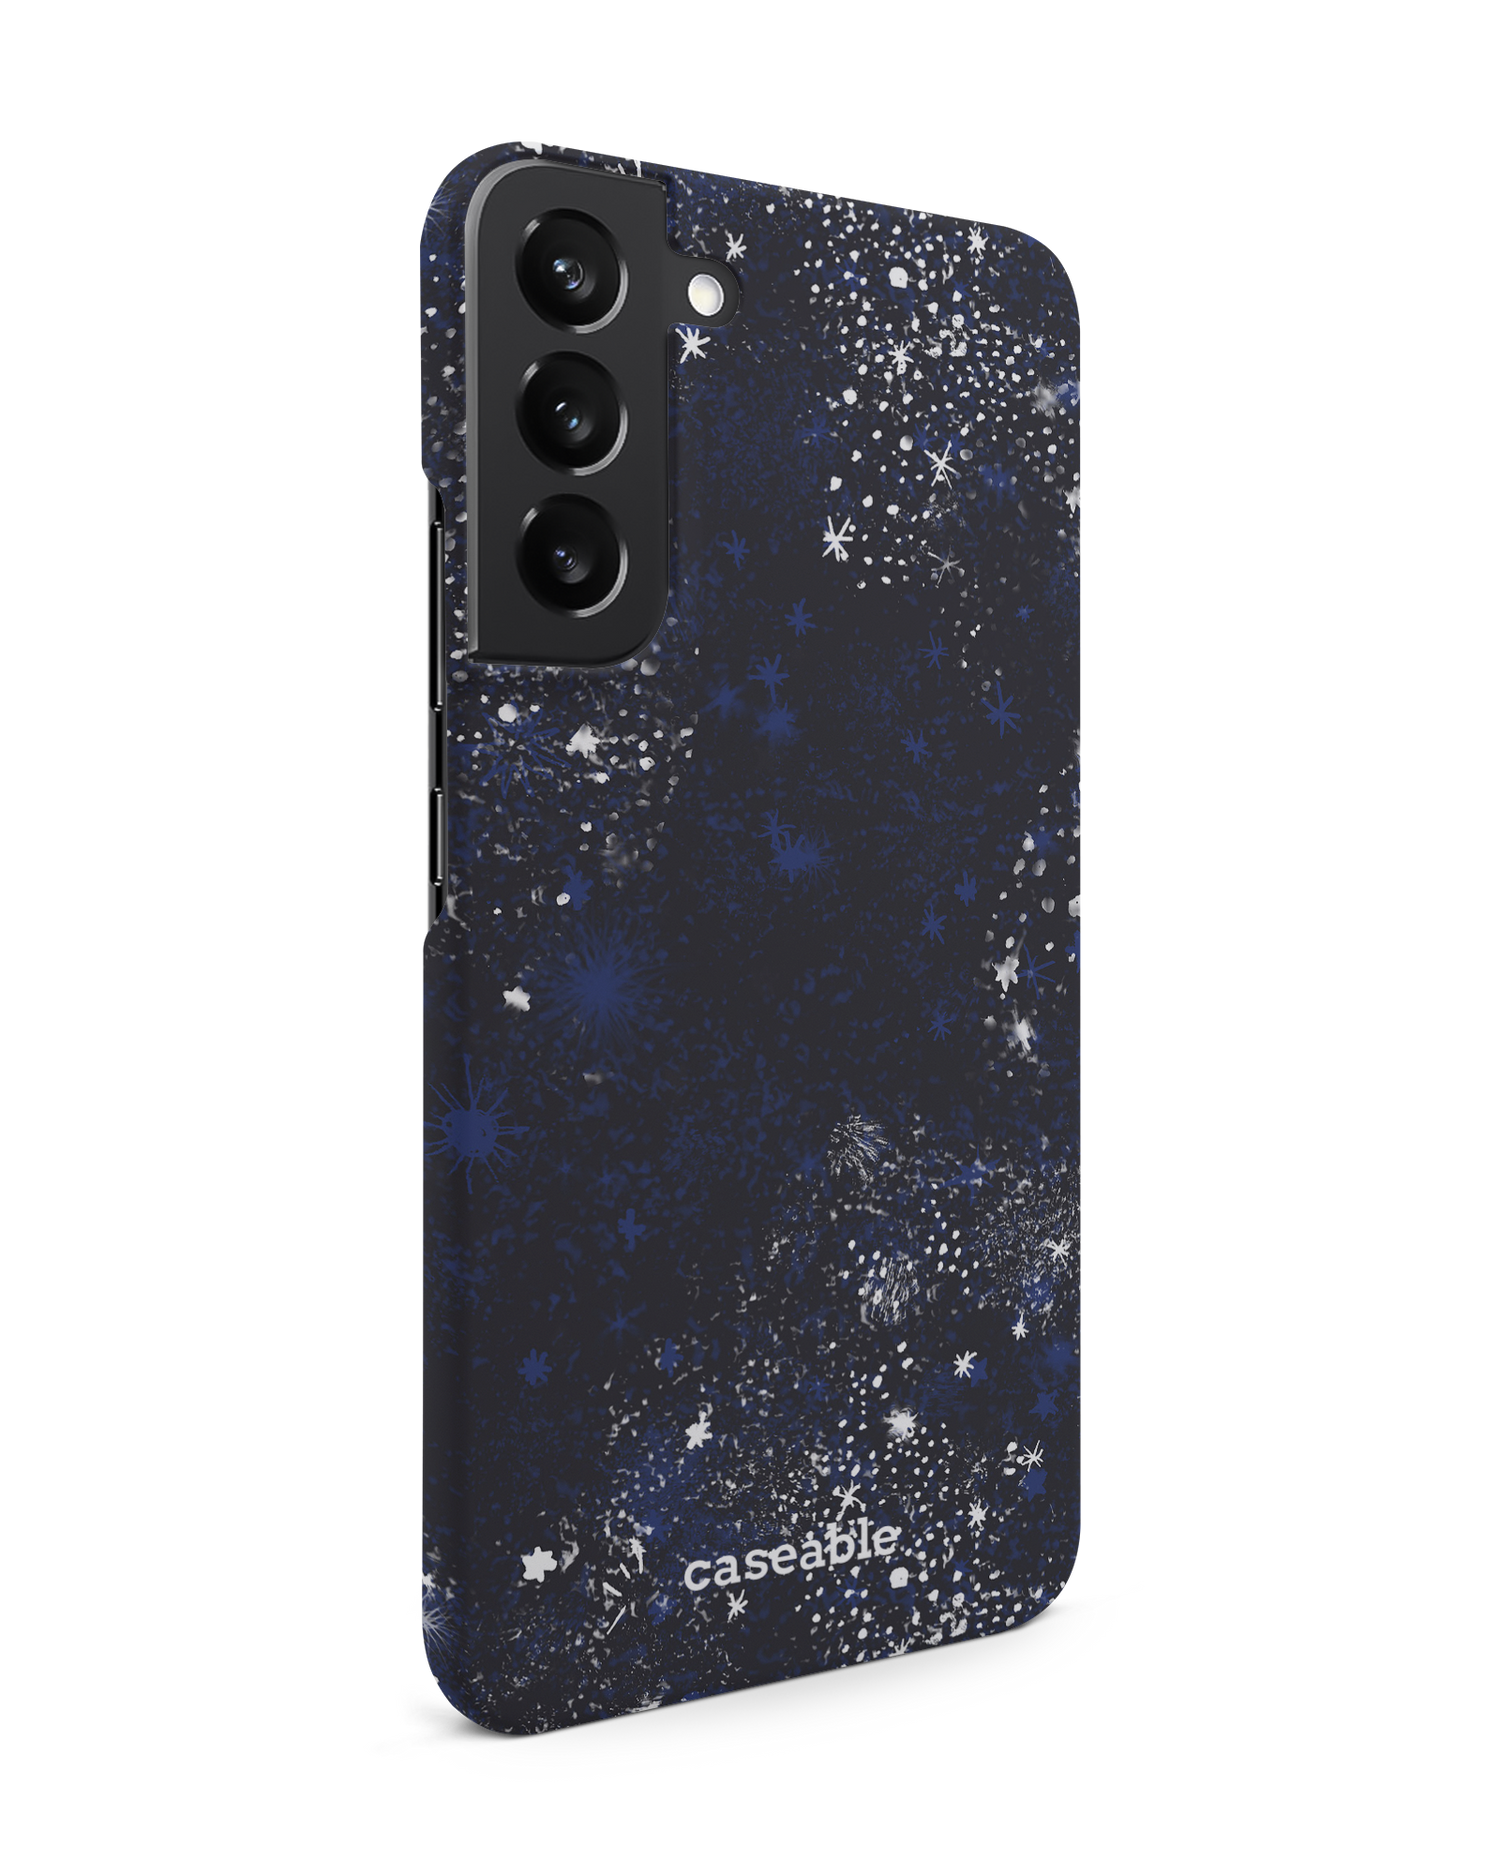 Starry Night Sky Hard Shell Phone Case Samsung Galaxy S22 Plus 5G: View from the left side